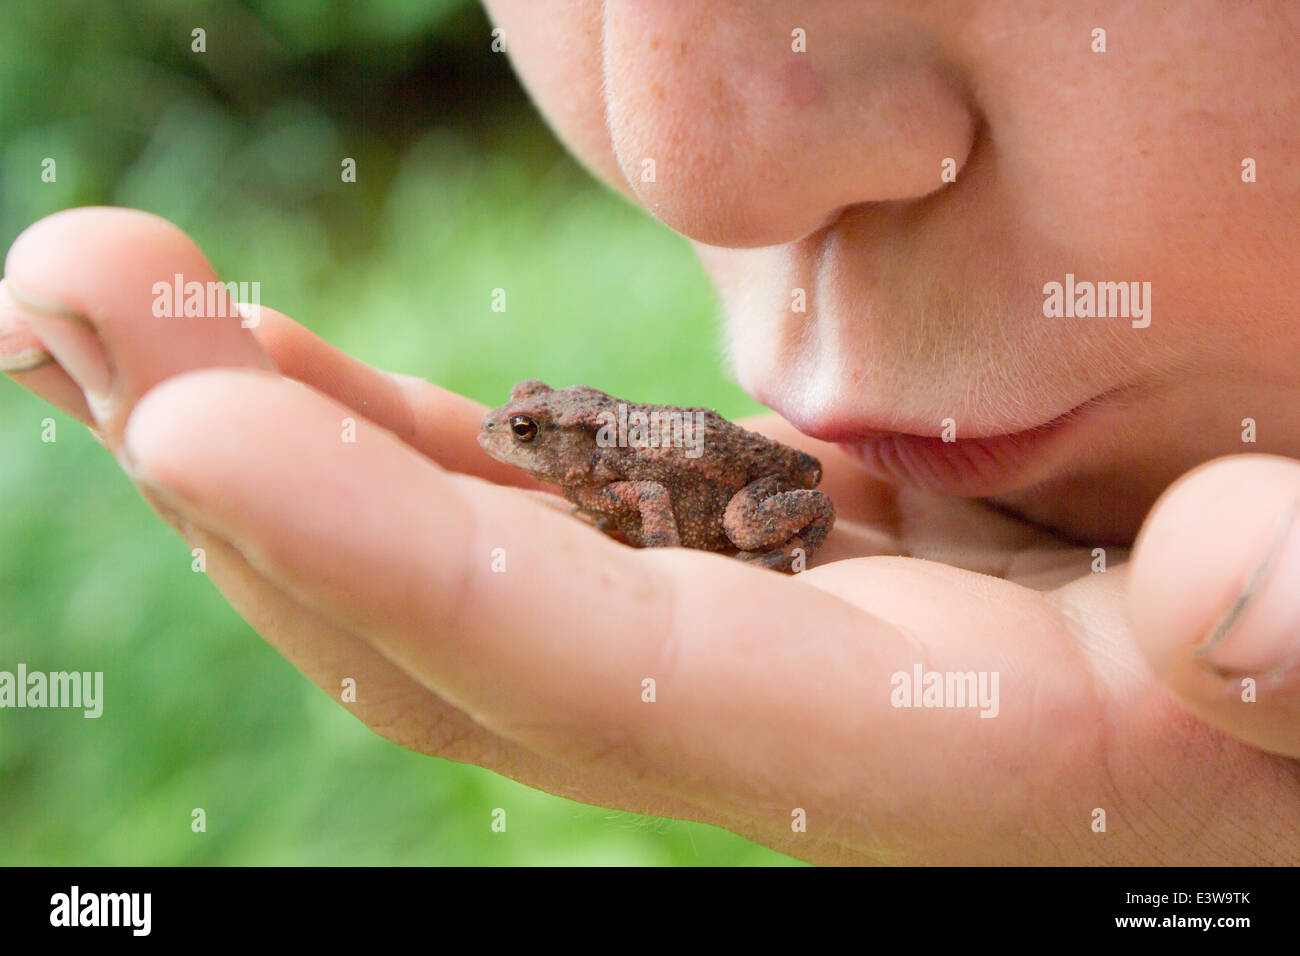 Child kissing a frog Stock Photo